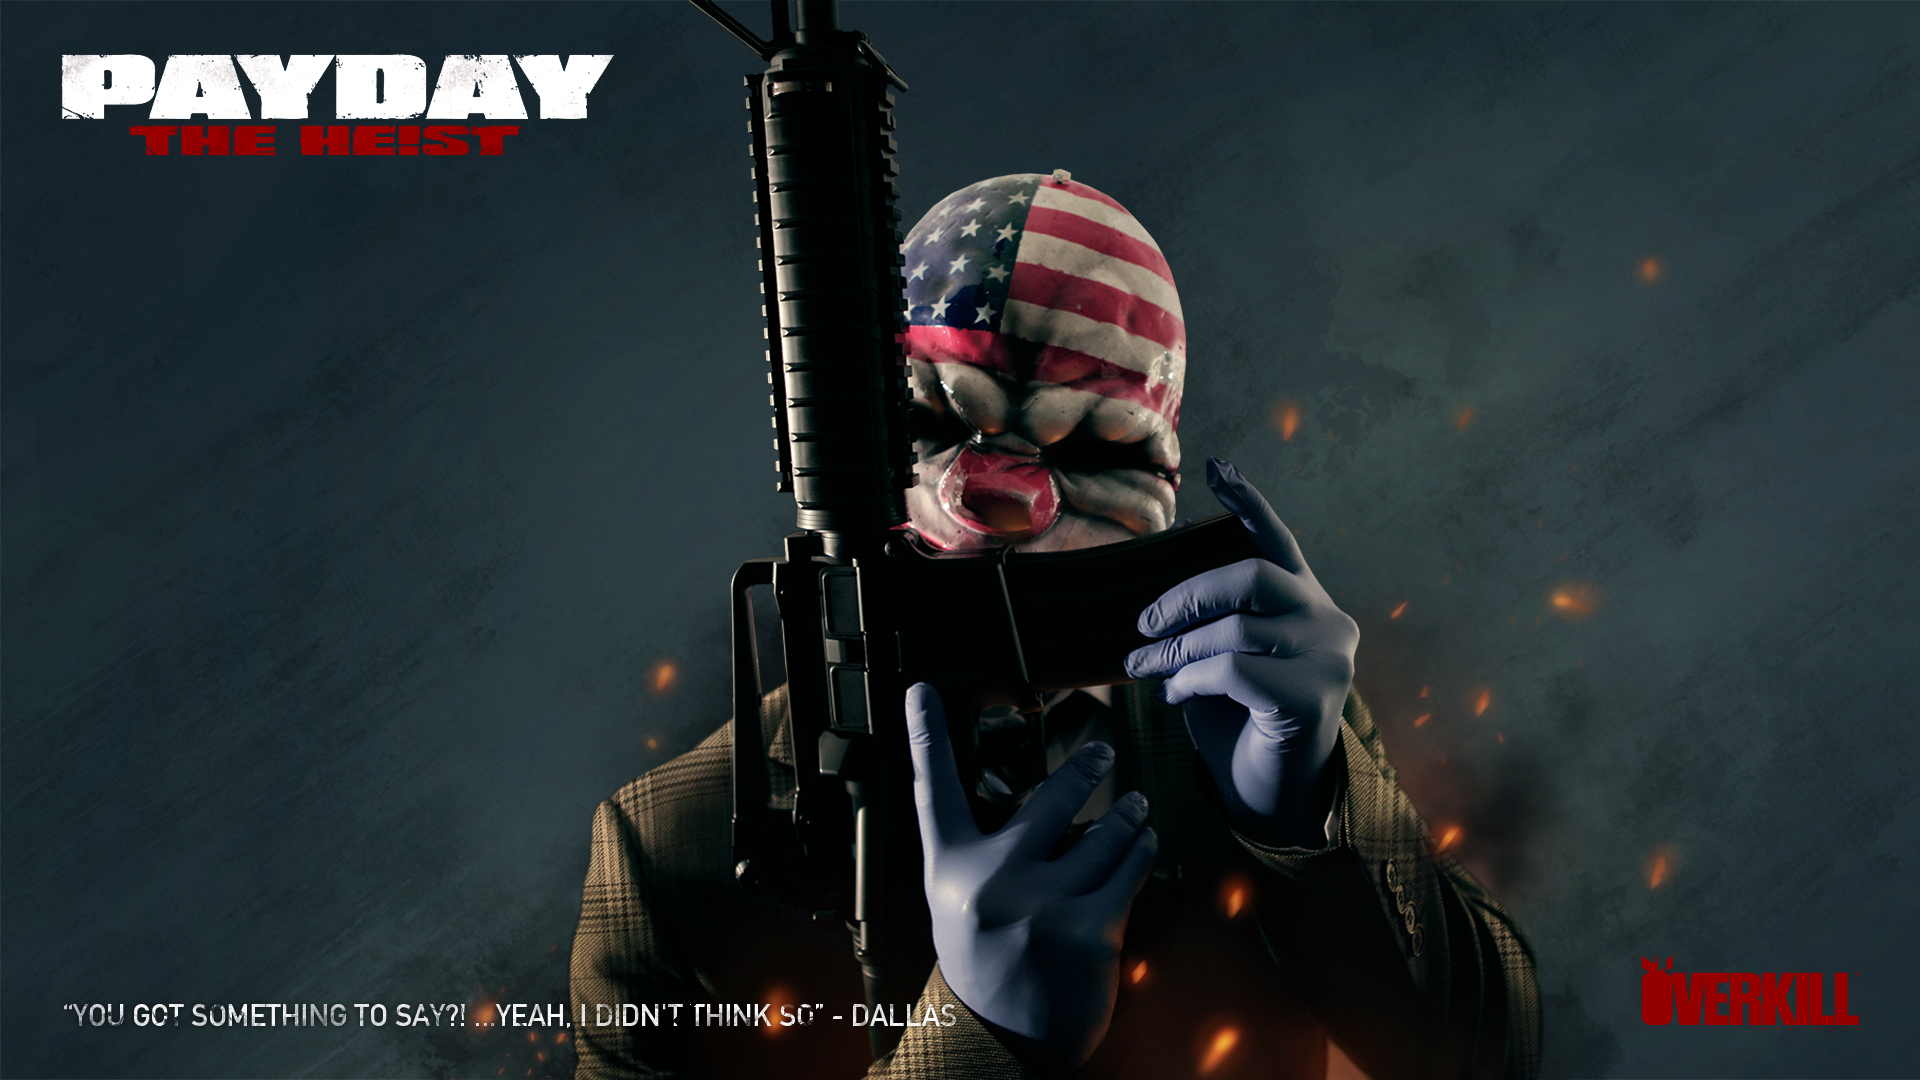 Payday 2 full game download